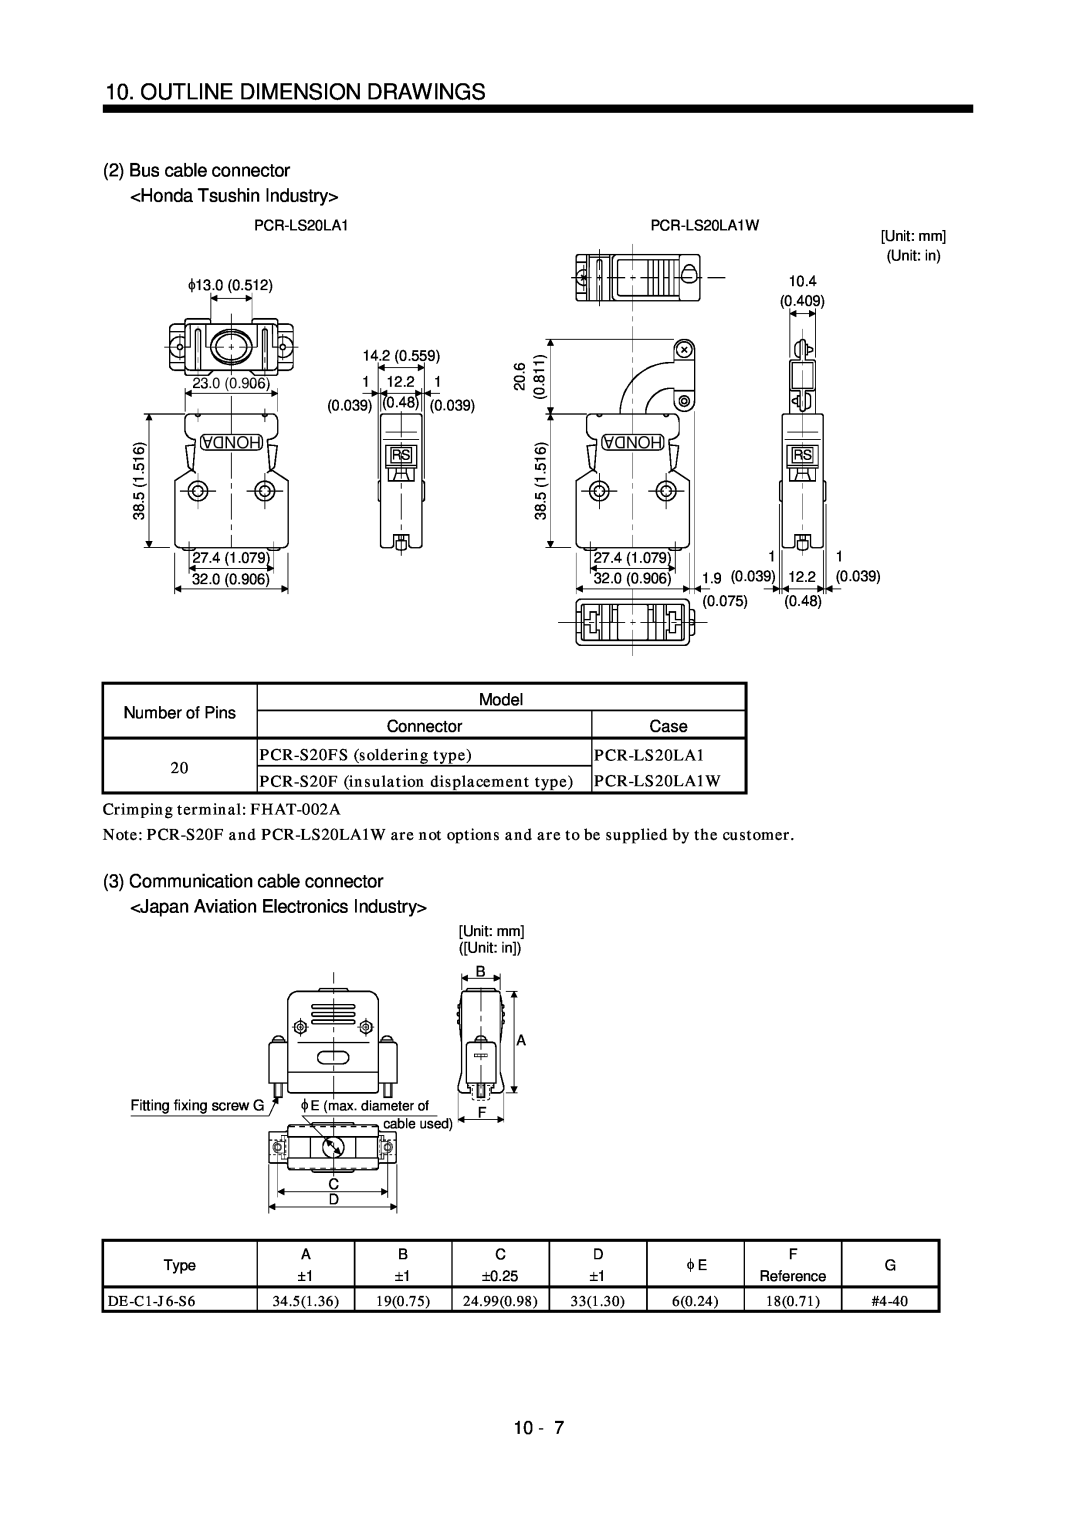 Bose MR-J2S- B 2Bus cable connector Honda Tsushin Industry, Outline Dimension Drawings, 10, PCR-S20FSsoldering type 